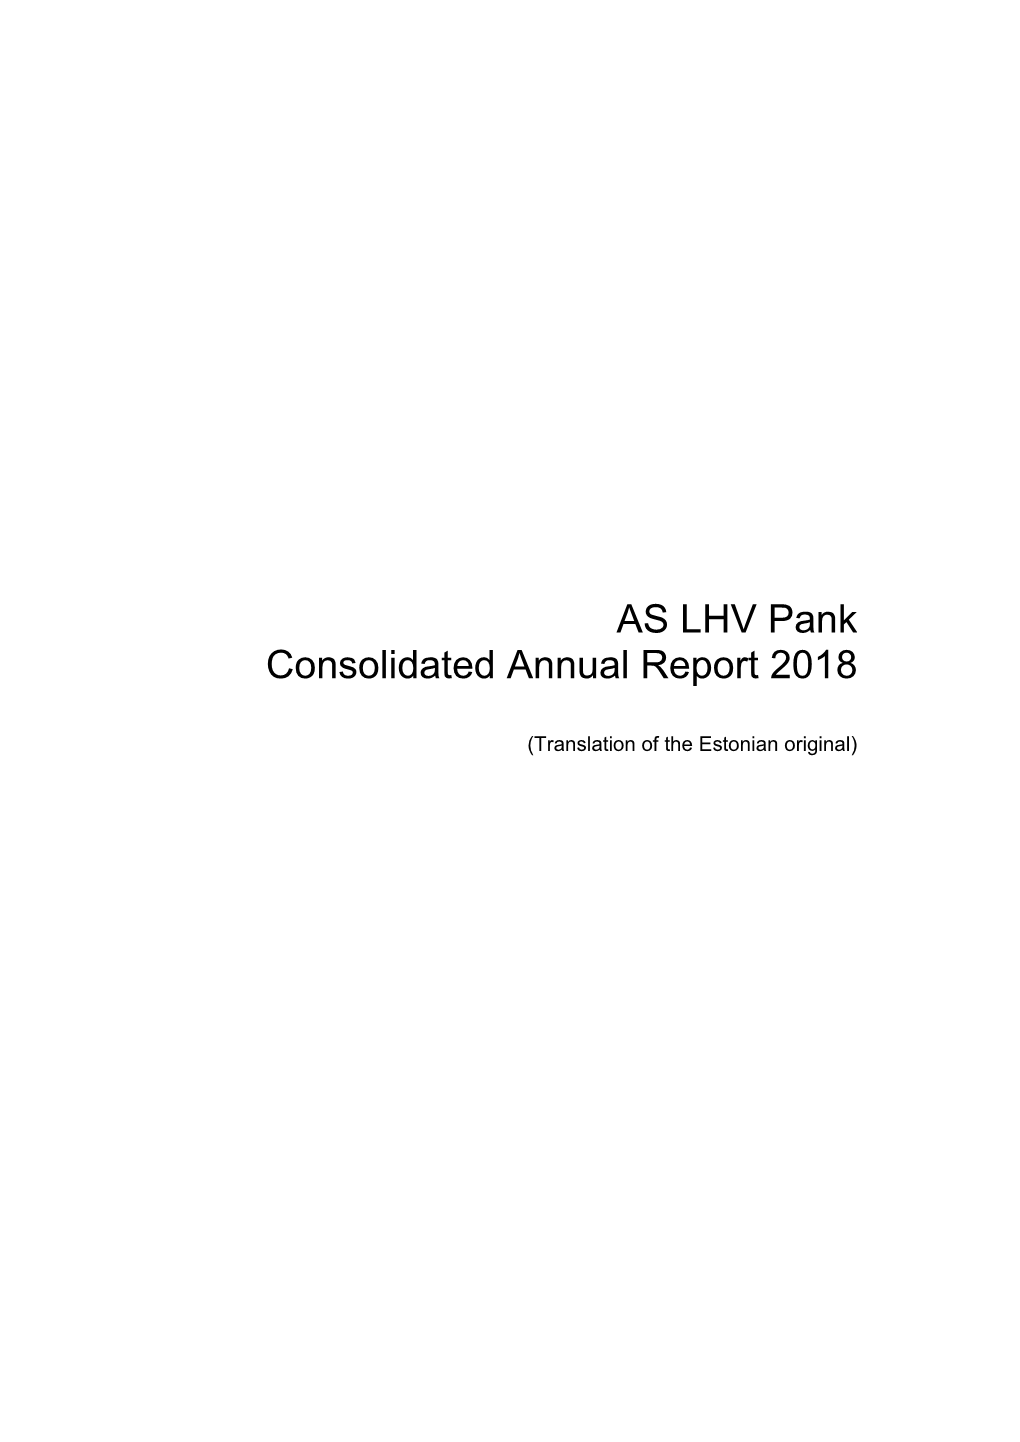 AS LHV Pank Consolidated Annual Report 2018